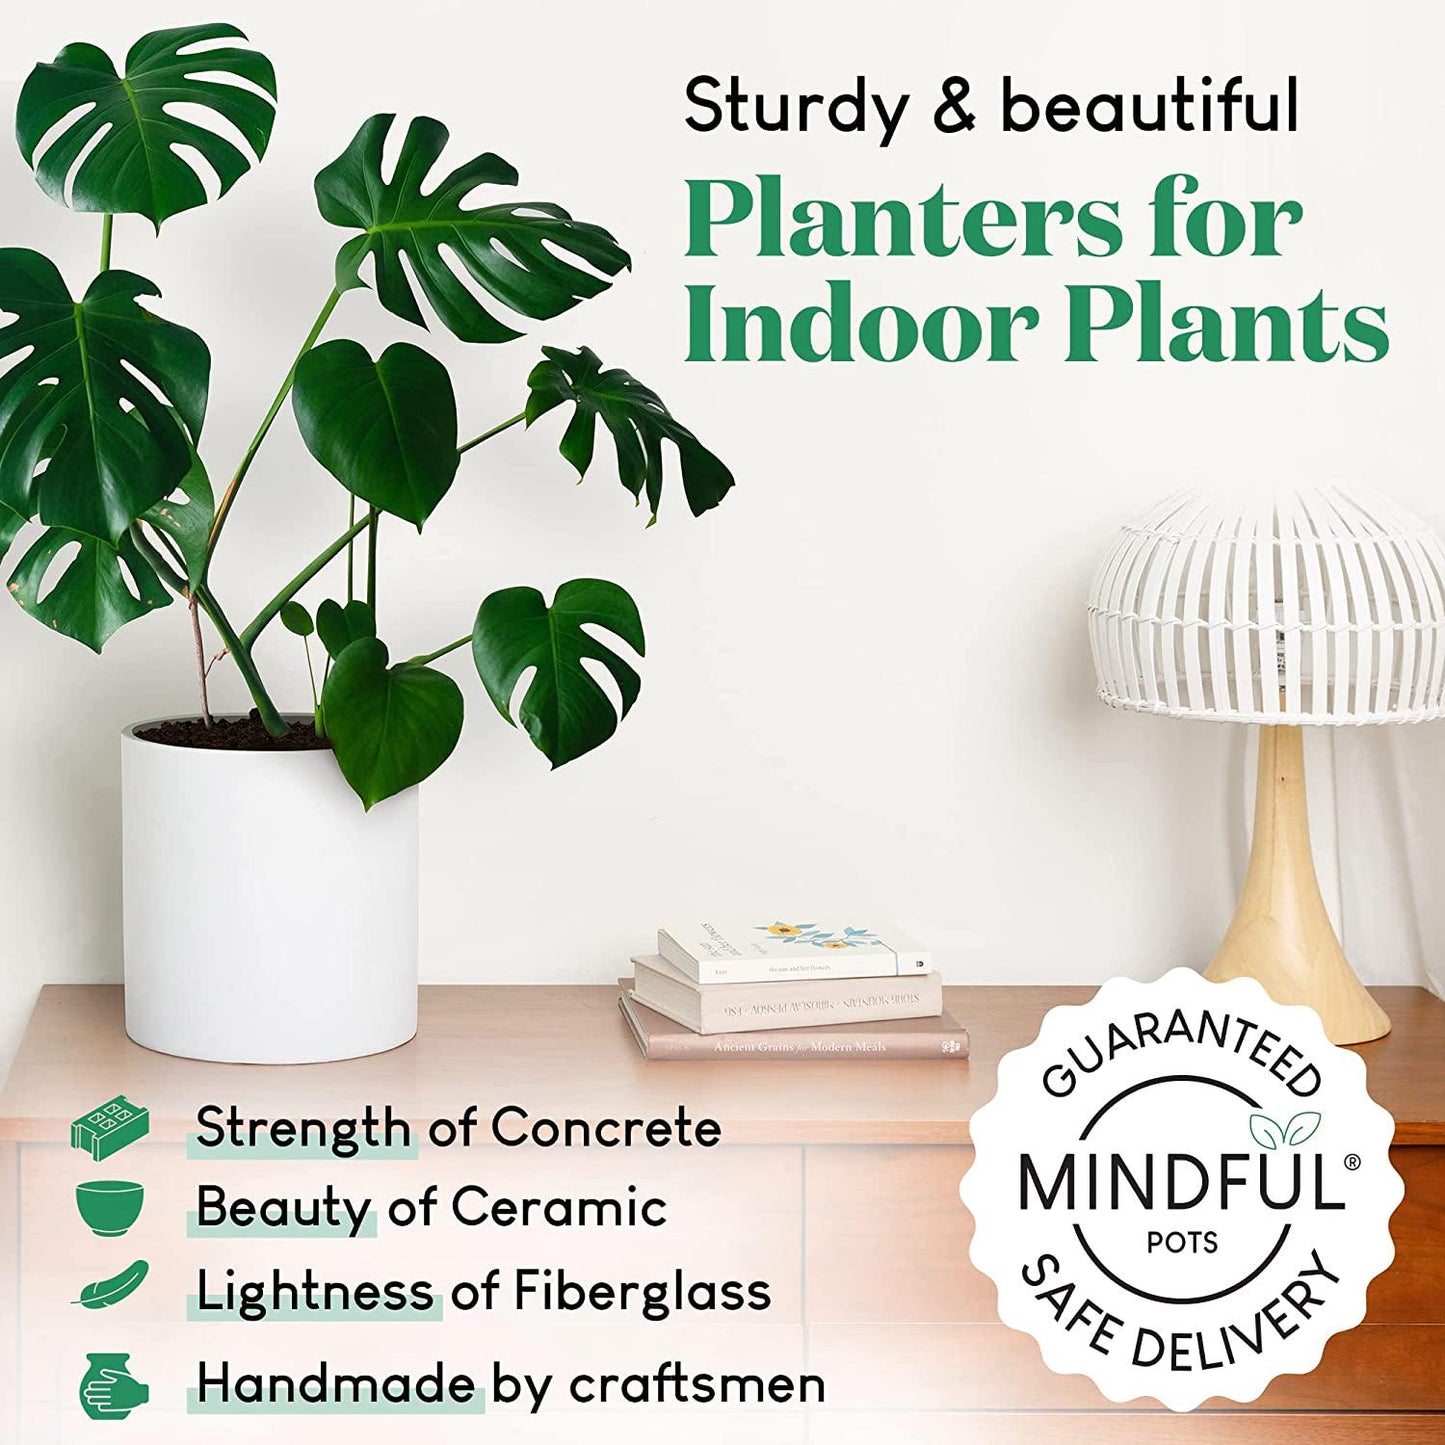 Mindful Pots 6 inch Plant Pot for Indoor Plants, Durable and Sturdy Fiberstone Ceramic Planter (White)